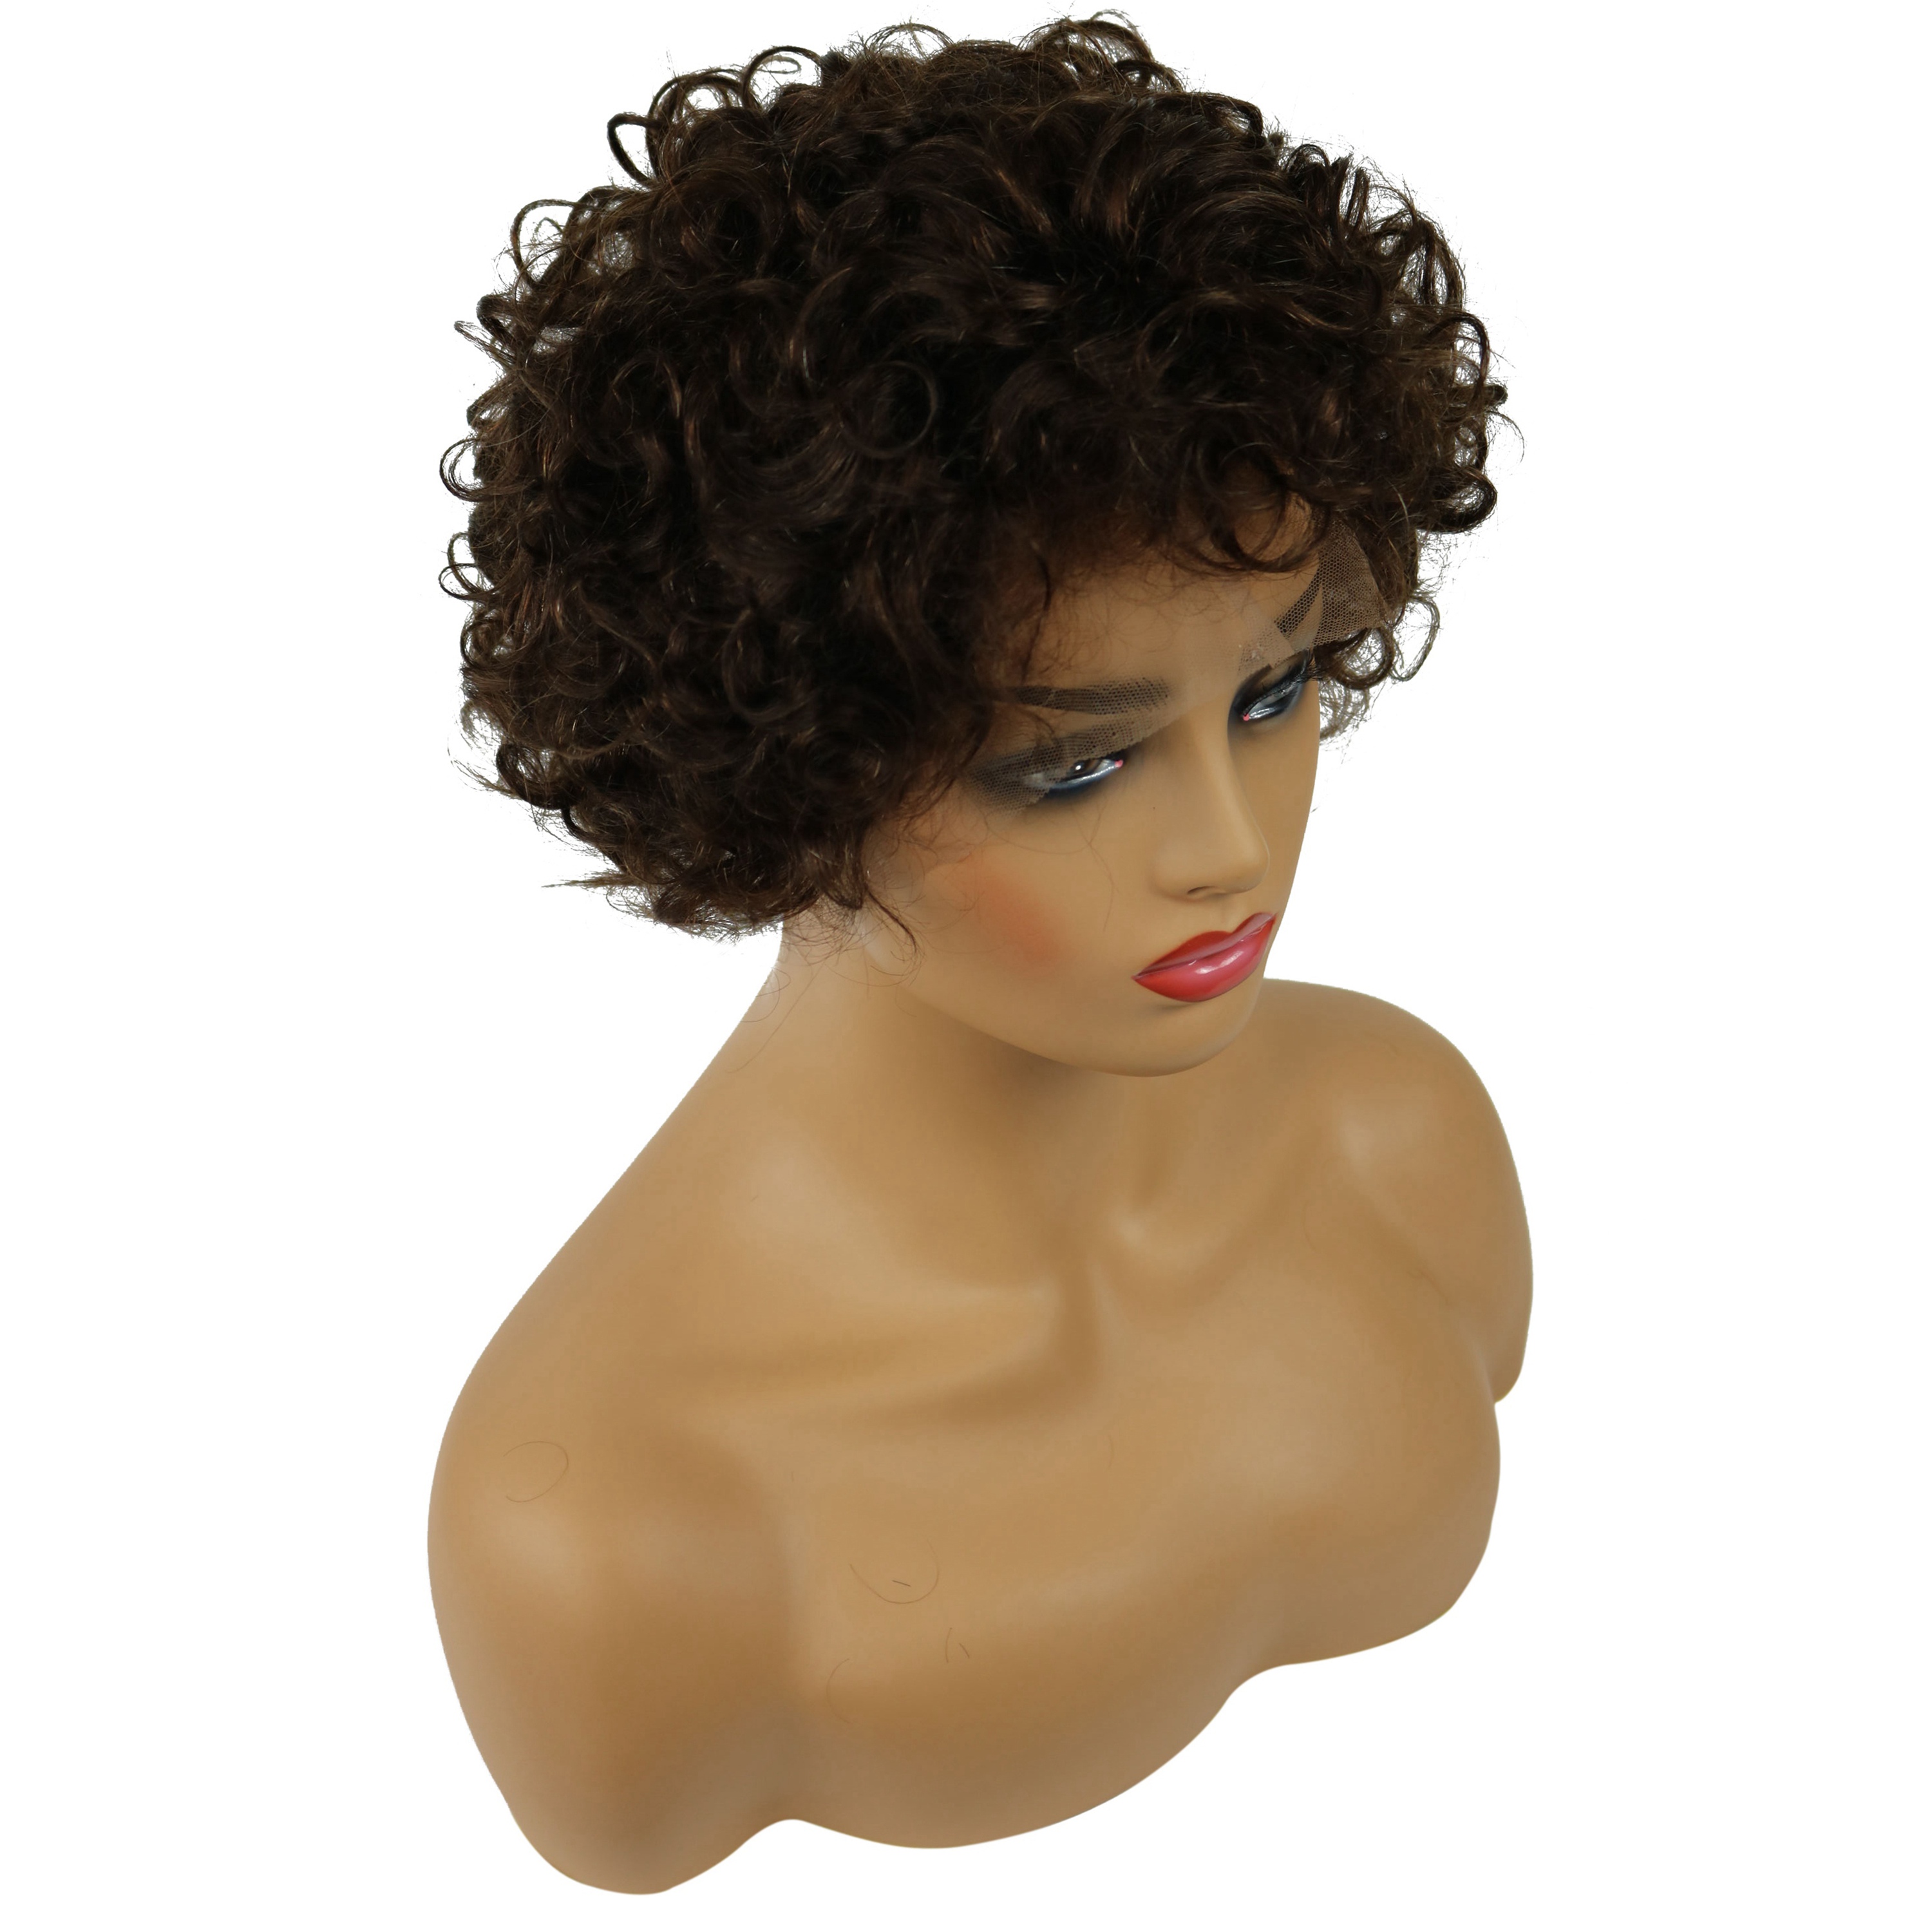 Curly Full Lace Cap Human Hair 120% Short Wigs For Black Women